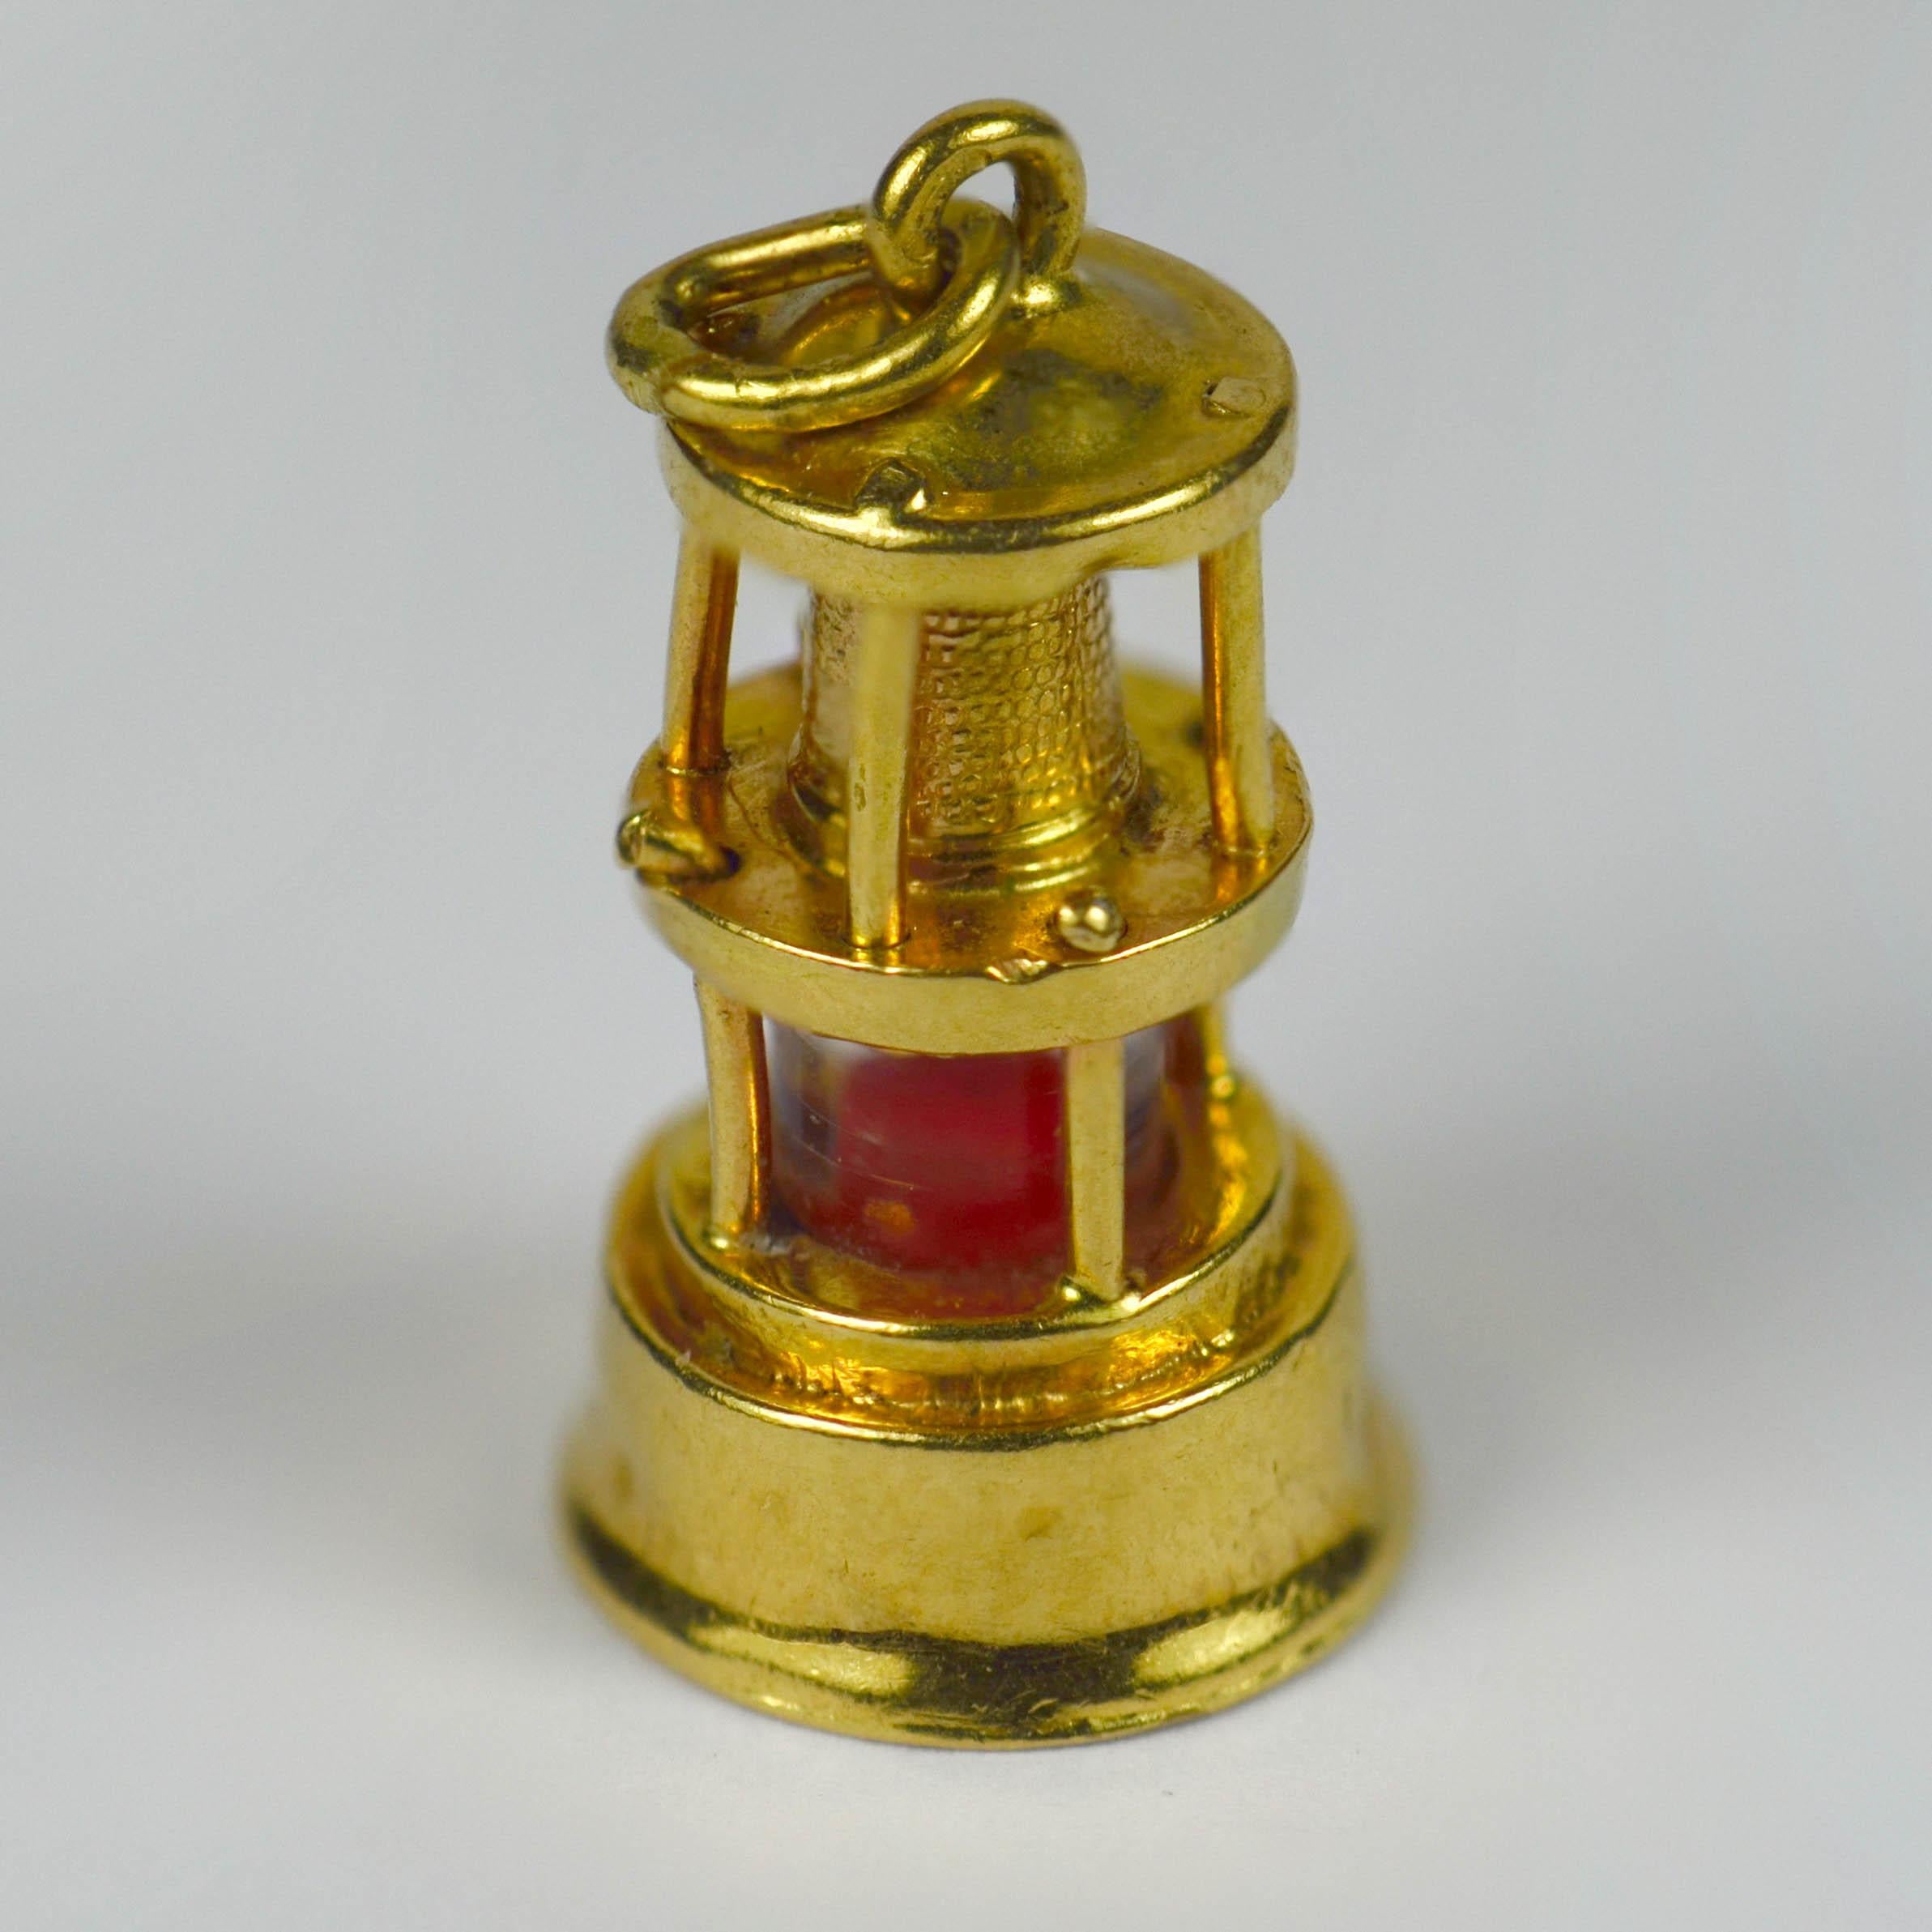 An 18 karat yellow gold charm pendant designed as a traditional oil lantern or lamp, the flame of the light indicated by coloured plastic. Stamped with the owl poincon for French import of 18 karat gold.

Dimensions: 2 x 0.9 x 0.9 cm
Weight: 1.28